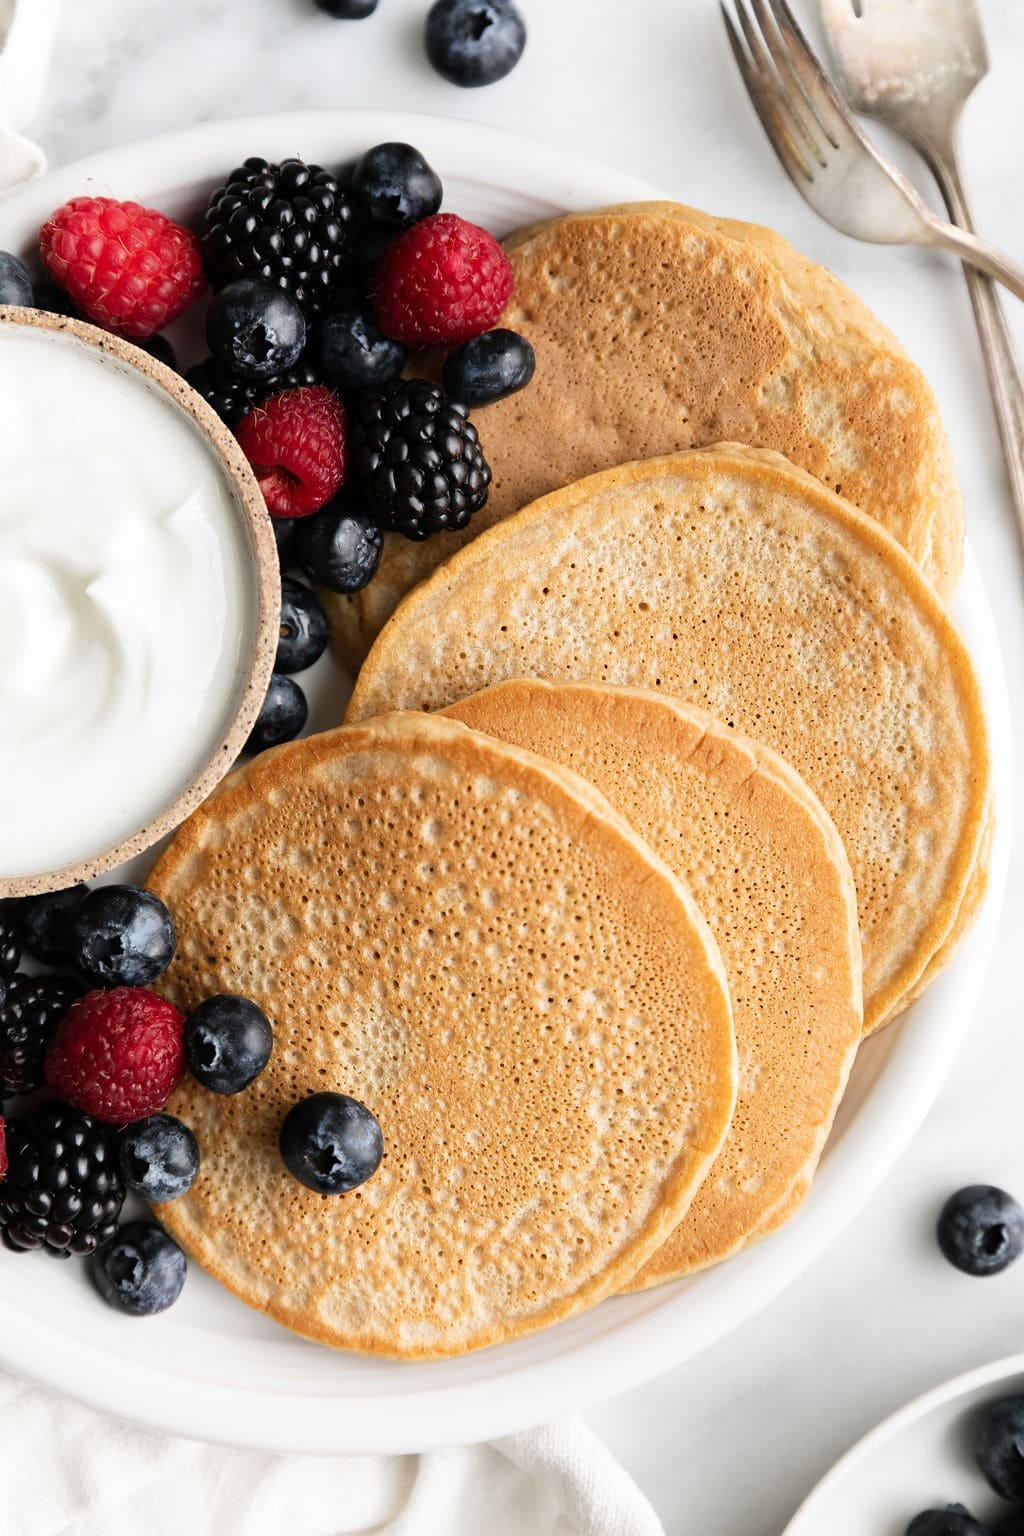 https://therealfooddietitians.com/wp-content/uploads/2023/03/Protein-Pancakes_4.jpg